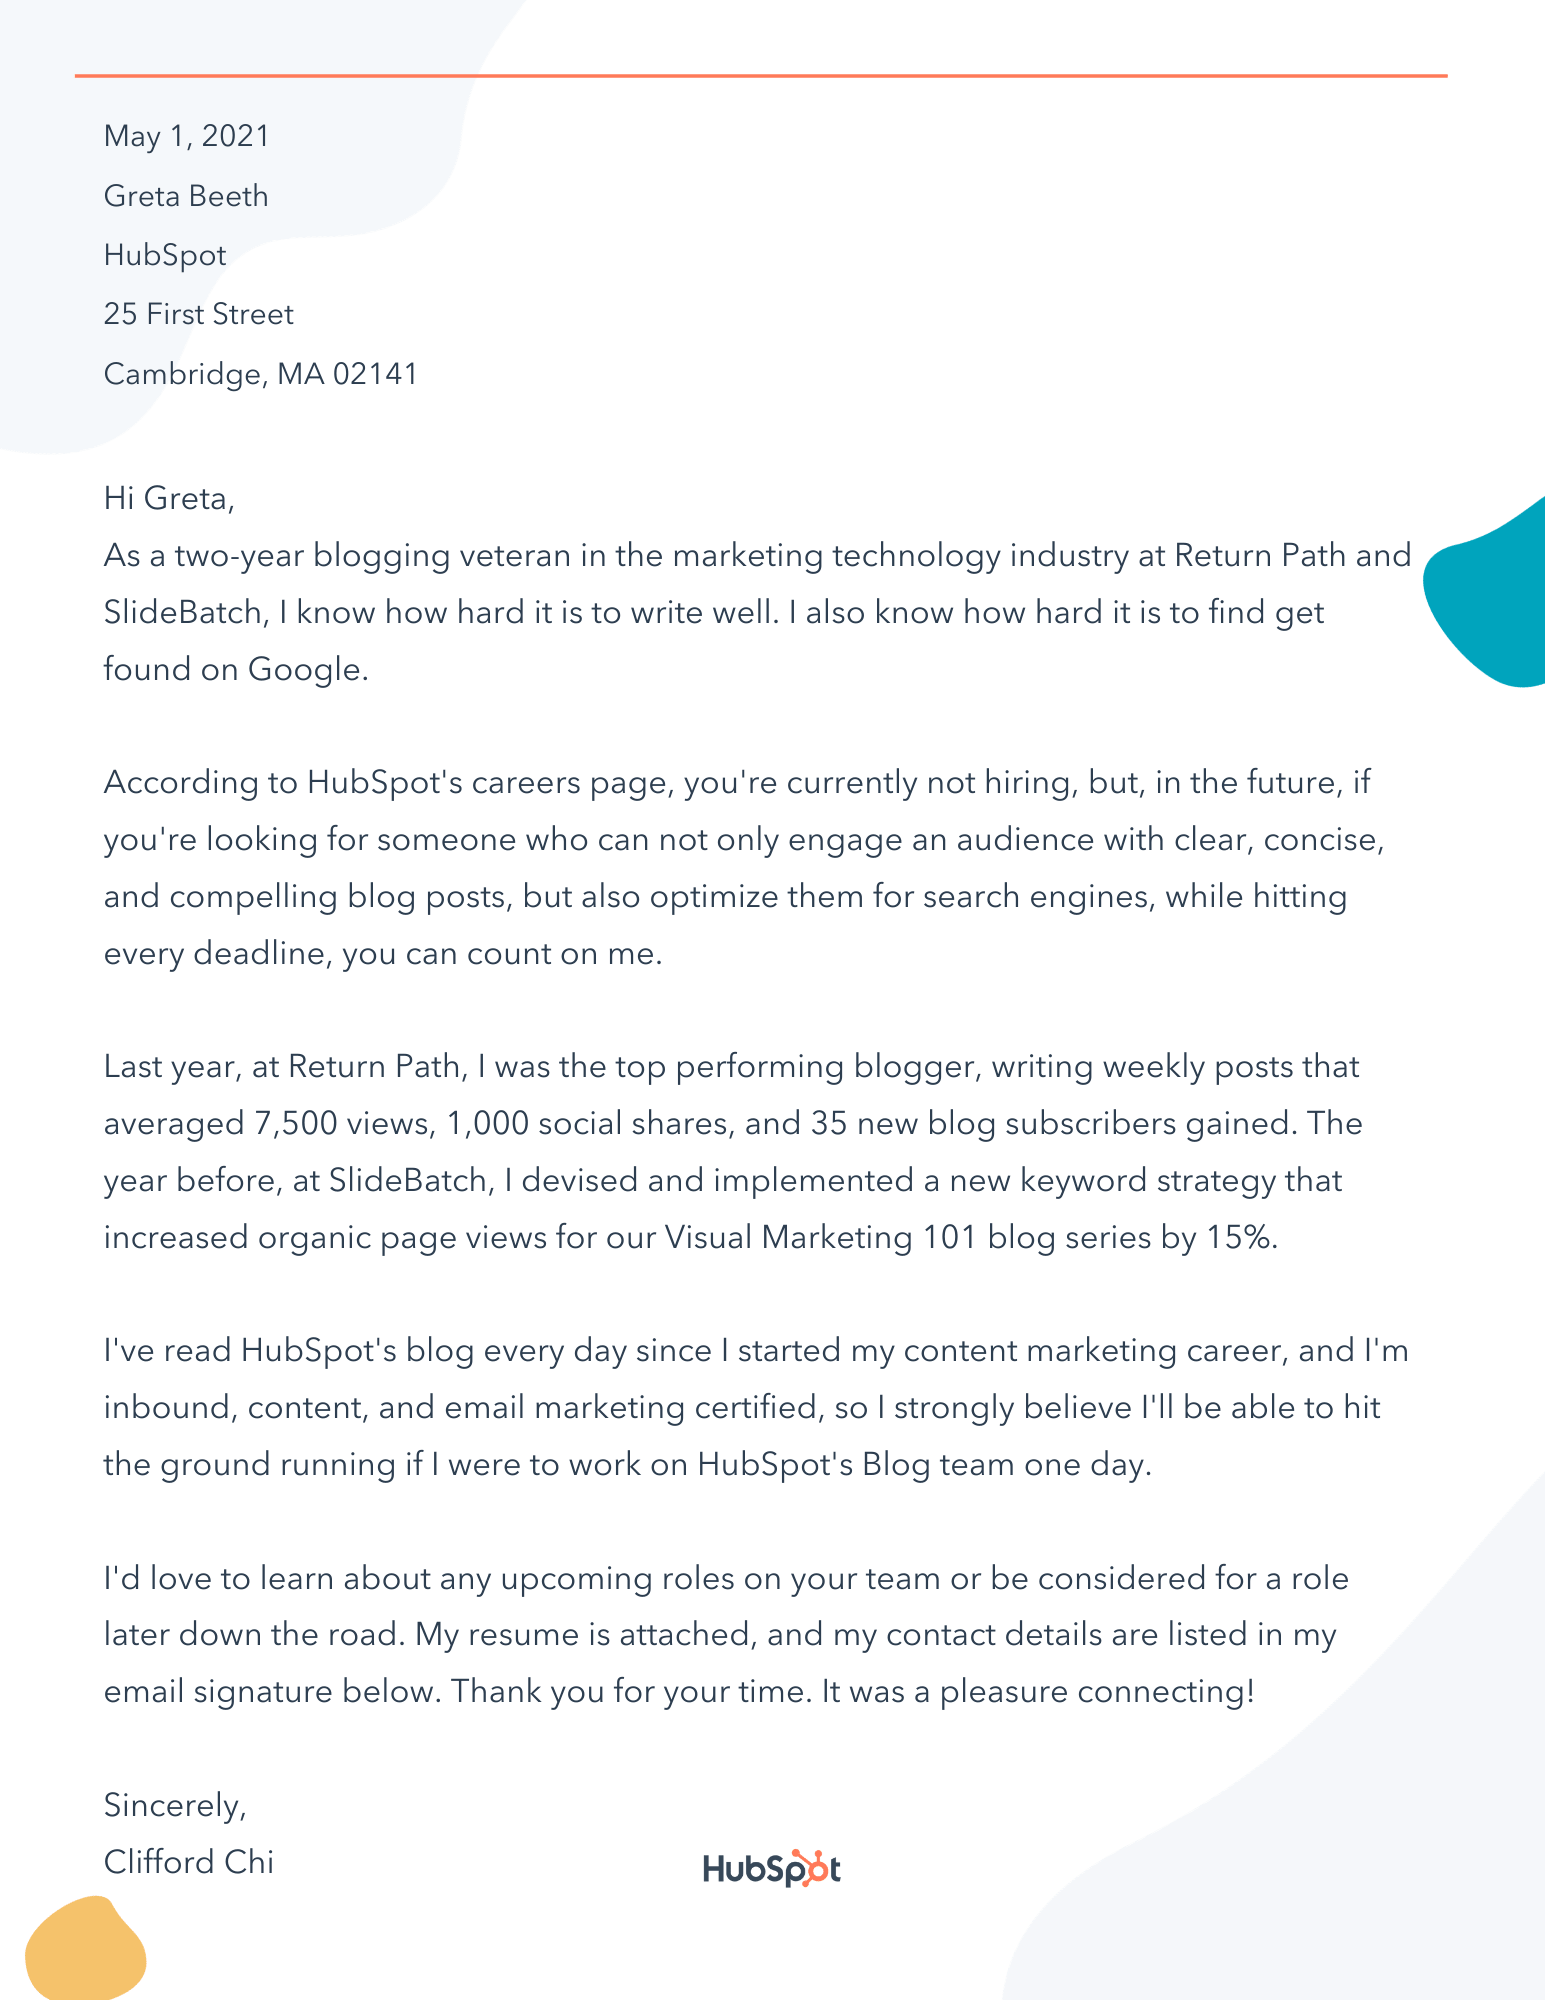 How to Write a Letter of Interest in 14 [Examples + Template]